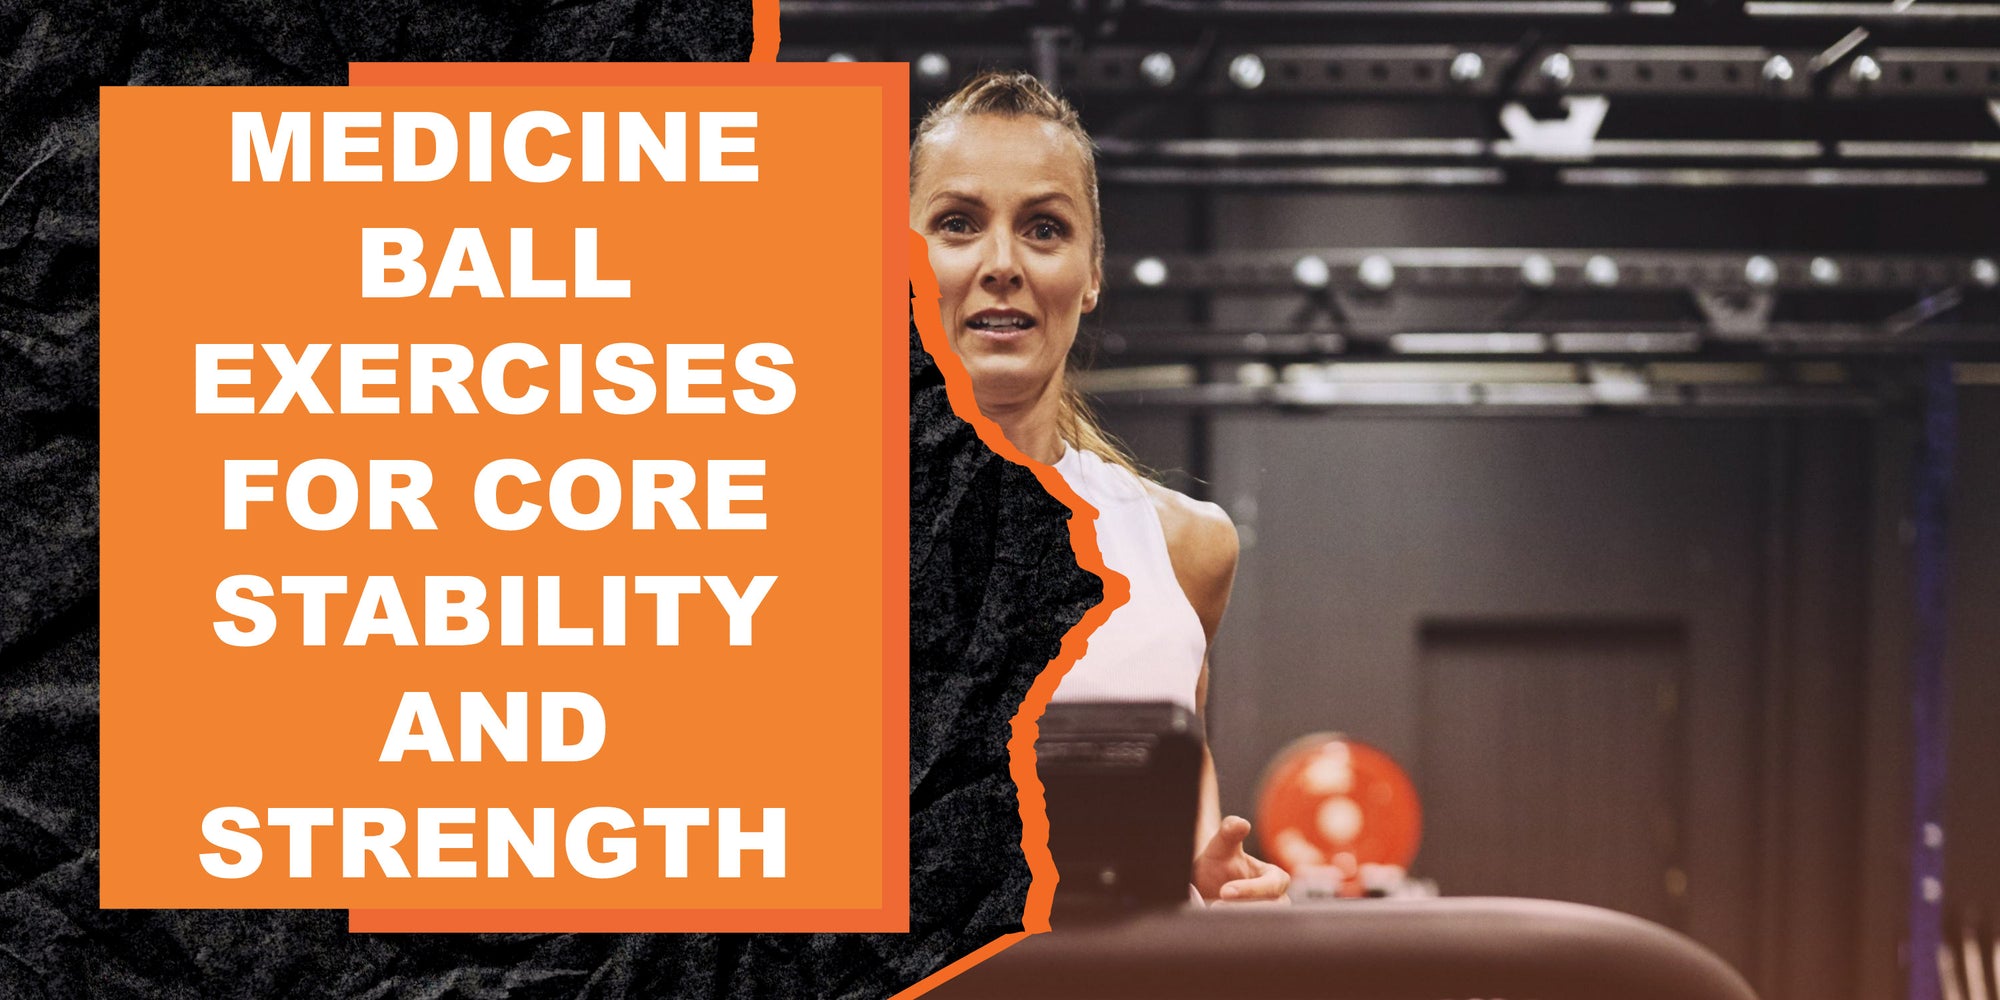 Medicine Ball Exercises for Core Stability and Strength